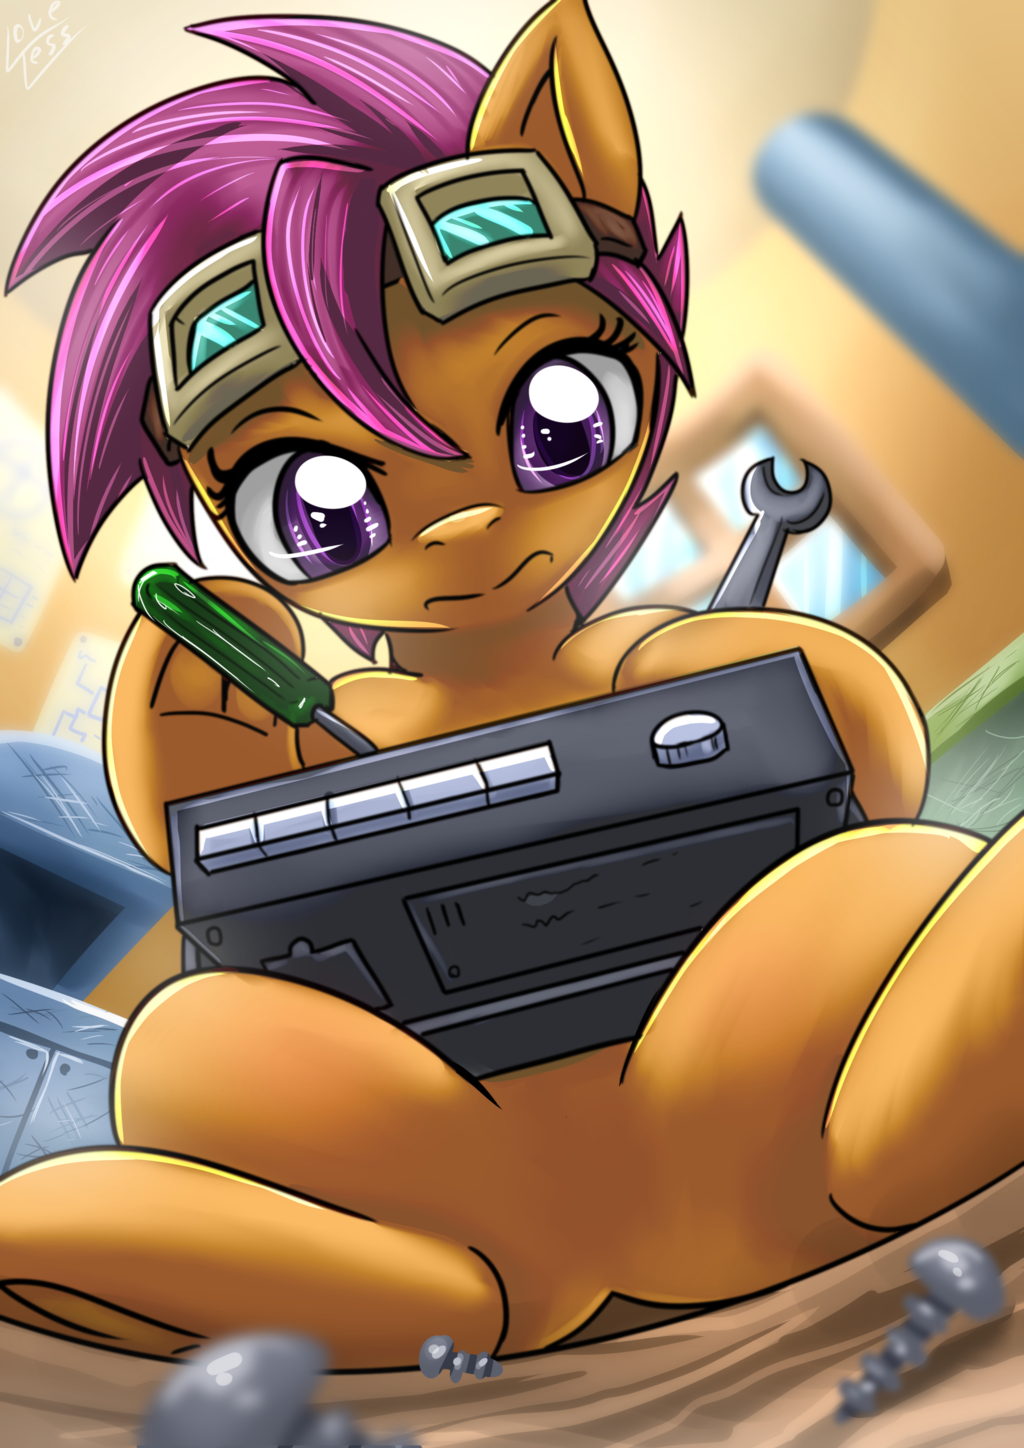 [TALOYQ Side Art] Scootaloo The Repairmare by vavacung